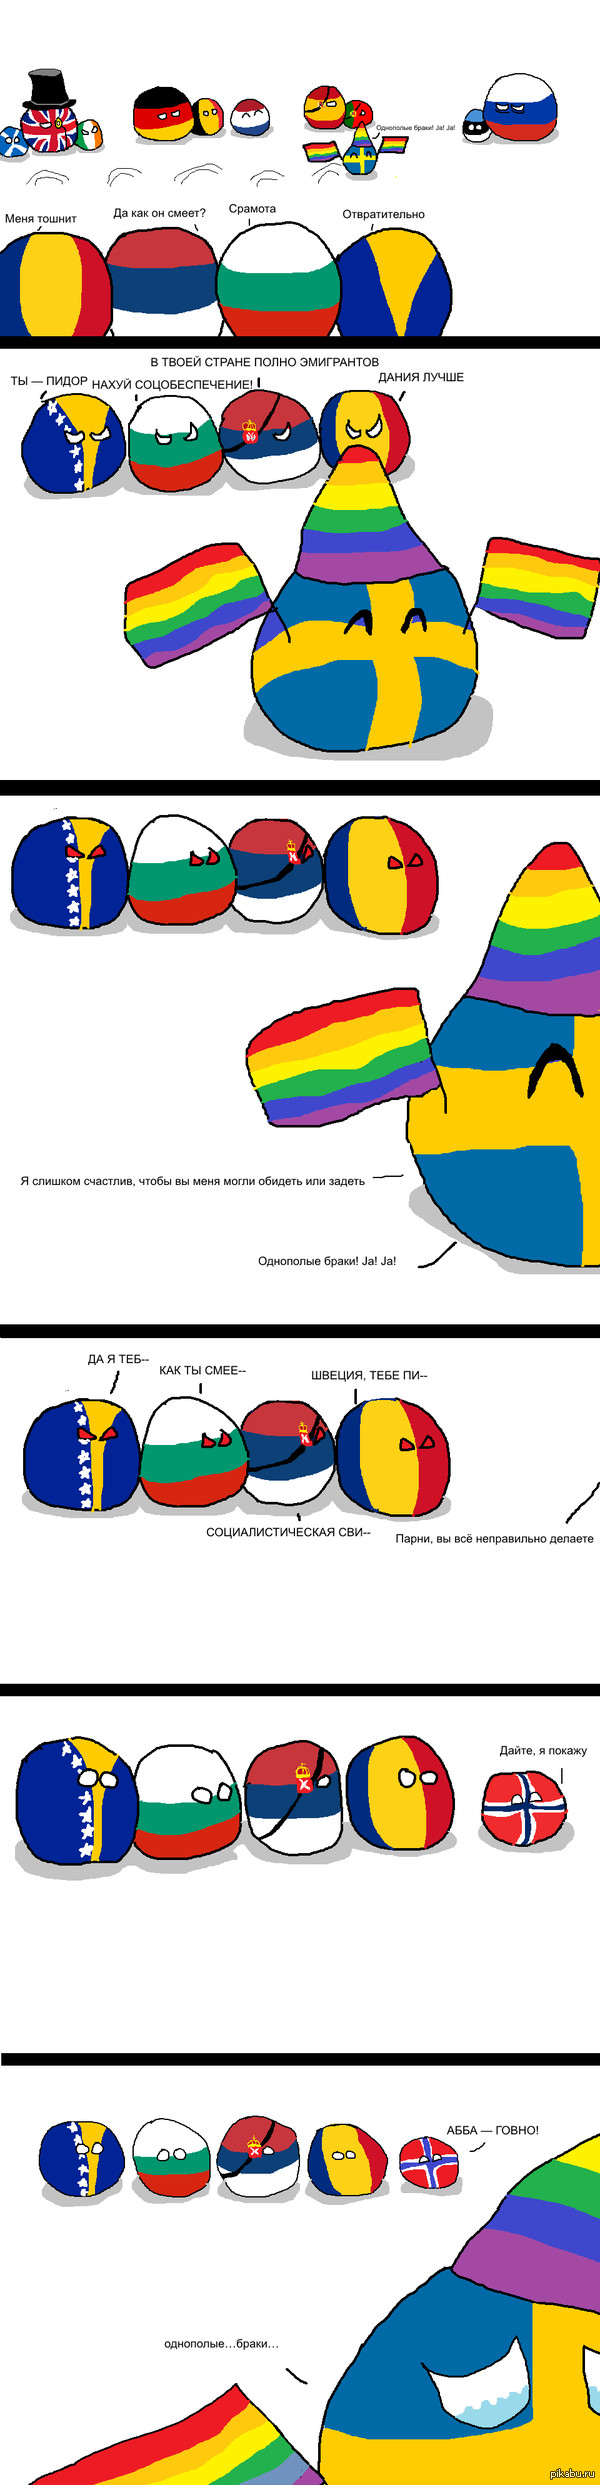 Holy touched - Countryballs, Comics, Sweden, Bosnia and Herzegovina, Norway, Same-sex marriage, Abba, Longpost, Mat